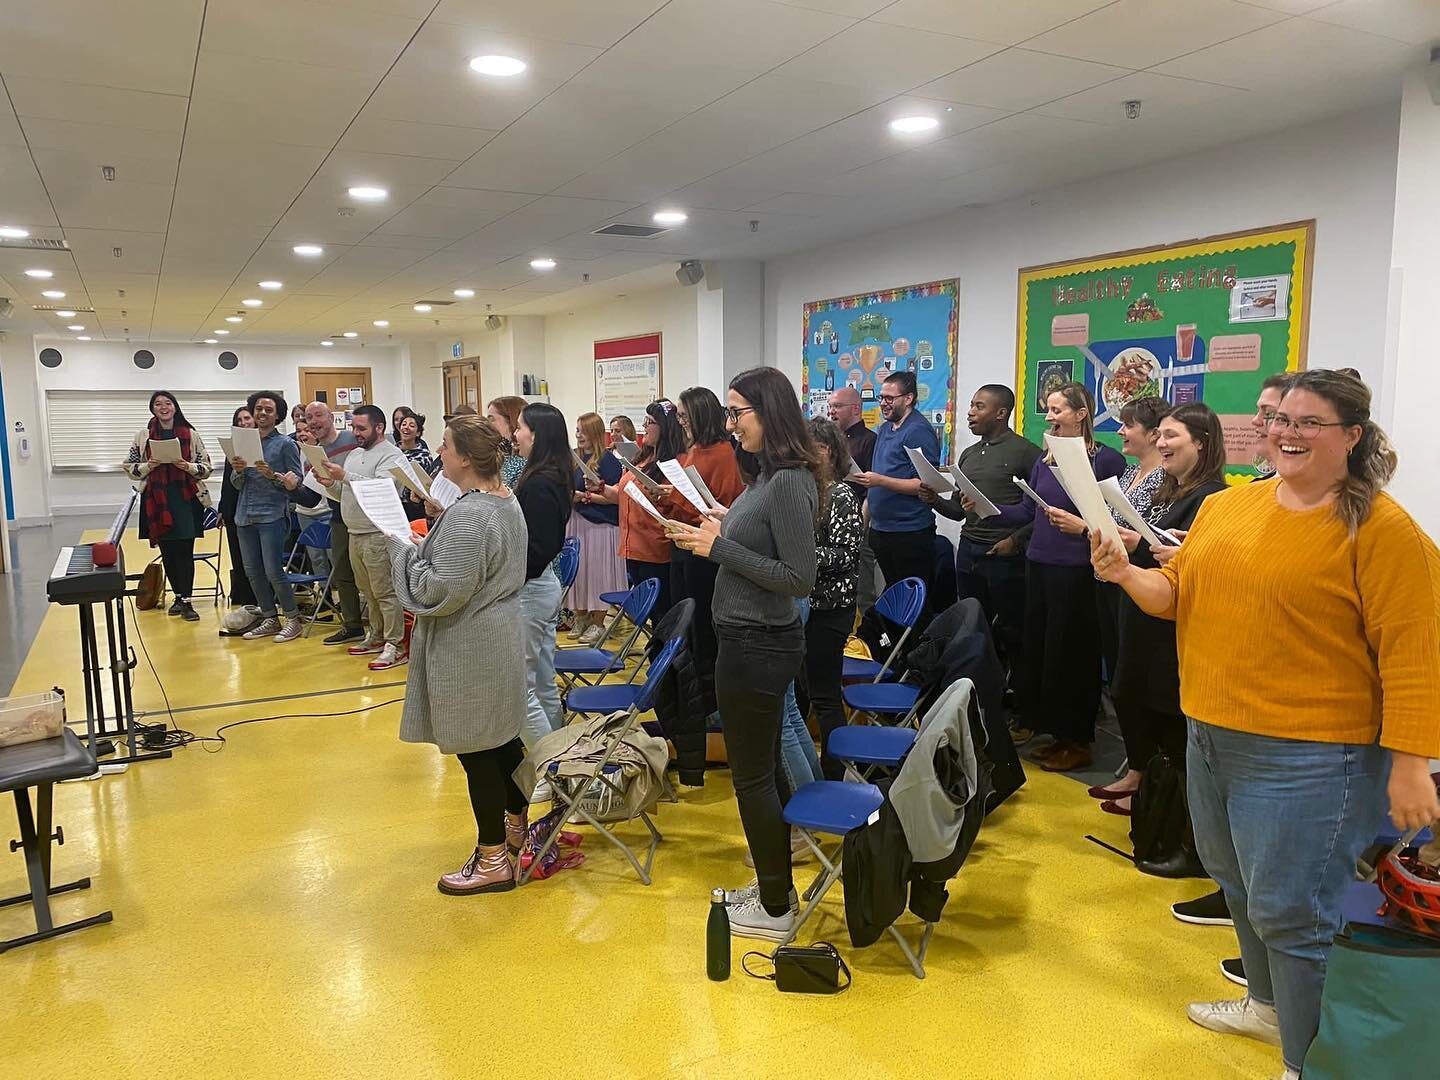 Hello Deptford! 👋 Such an amazing feeling when months of planning turns into a bunch of strangers singing together for the first time! This is clearly a &ldquo;pretend you&rsquo;re singing&rdquo; moment as we forgot to take a photo! #deptfordchoir